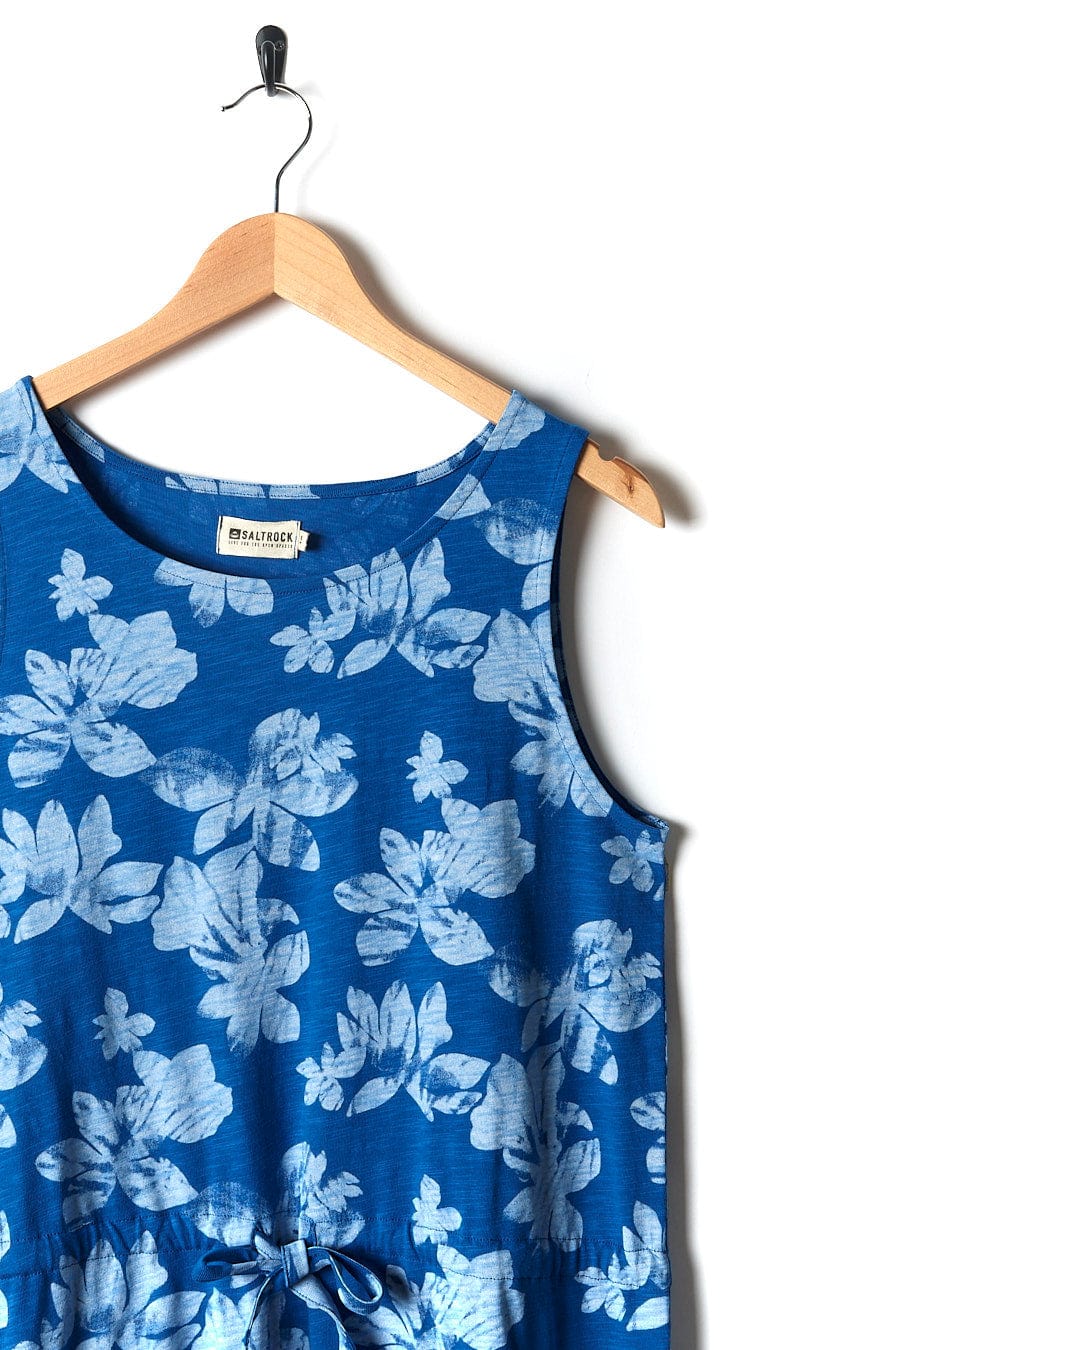 A Saltrock blue and white Floral - Womens Tie Vest Dress hanging on a hanger.